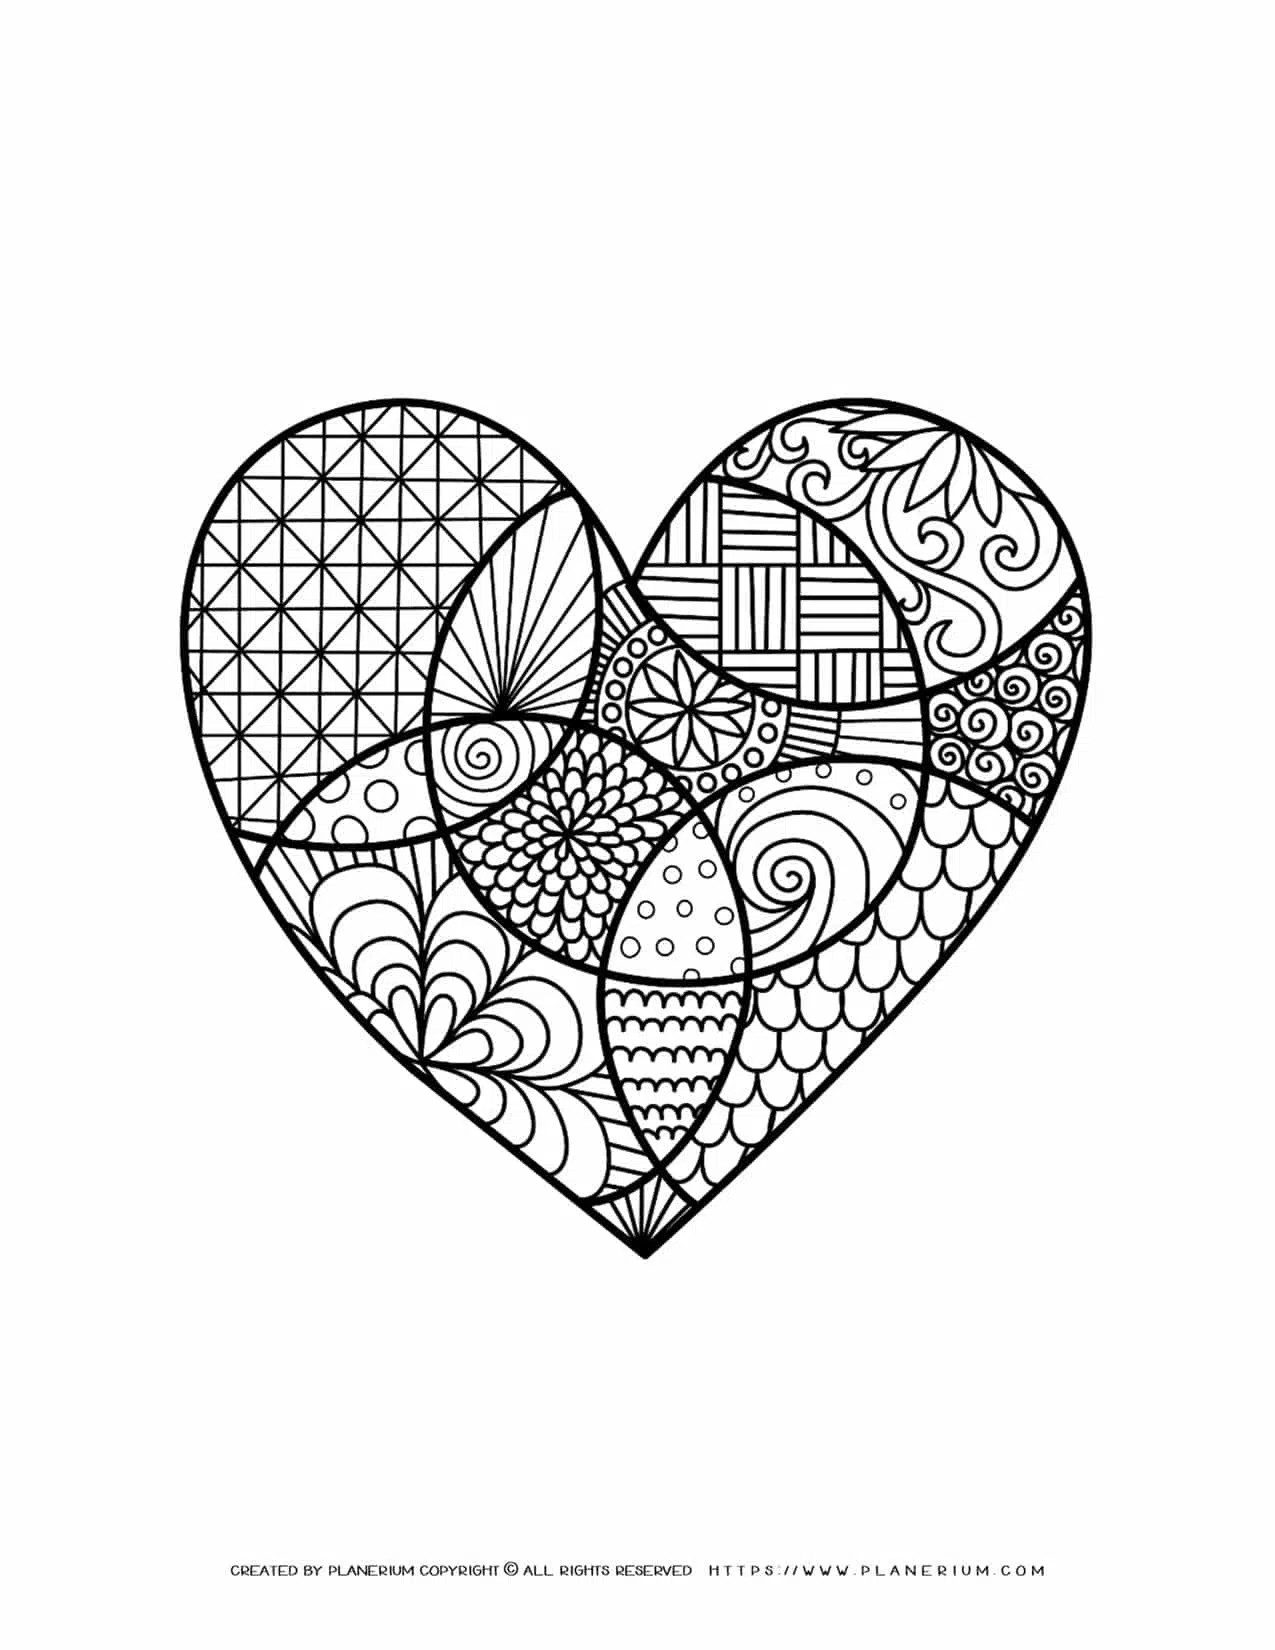 Valentines Day - Coloring Page - Decorative Heart | Planerium